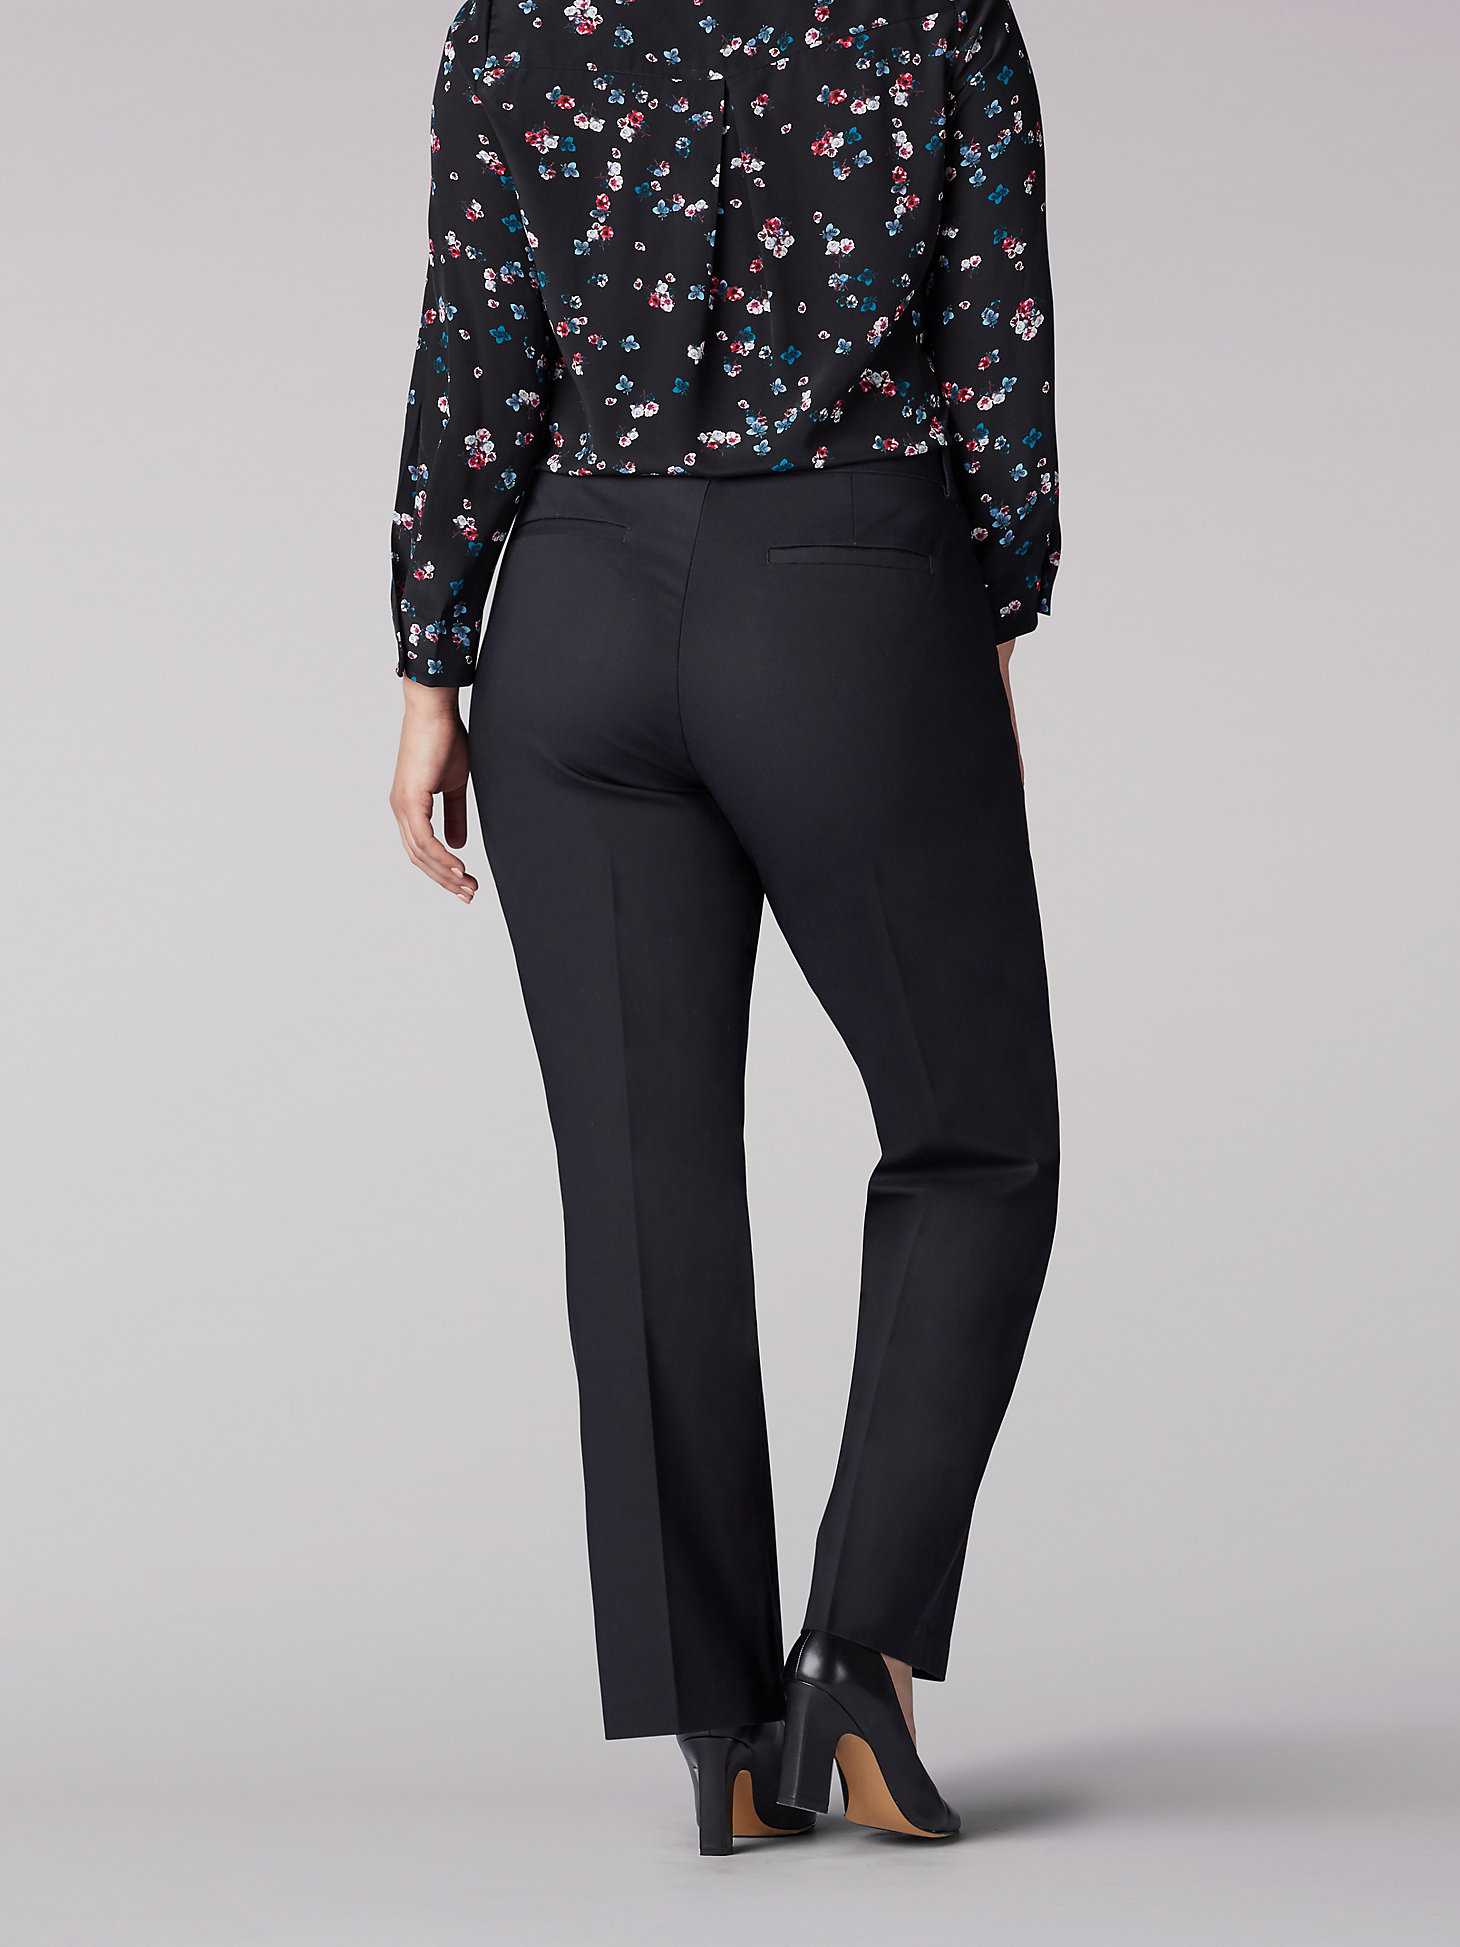 Women's Ultra Lux with Flex Motion Regular Fit Trouser Pant (Plus) in Black alternative view 1